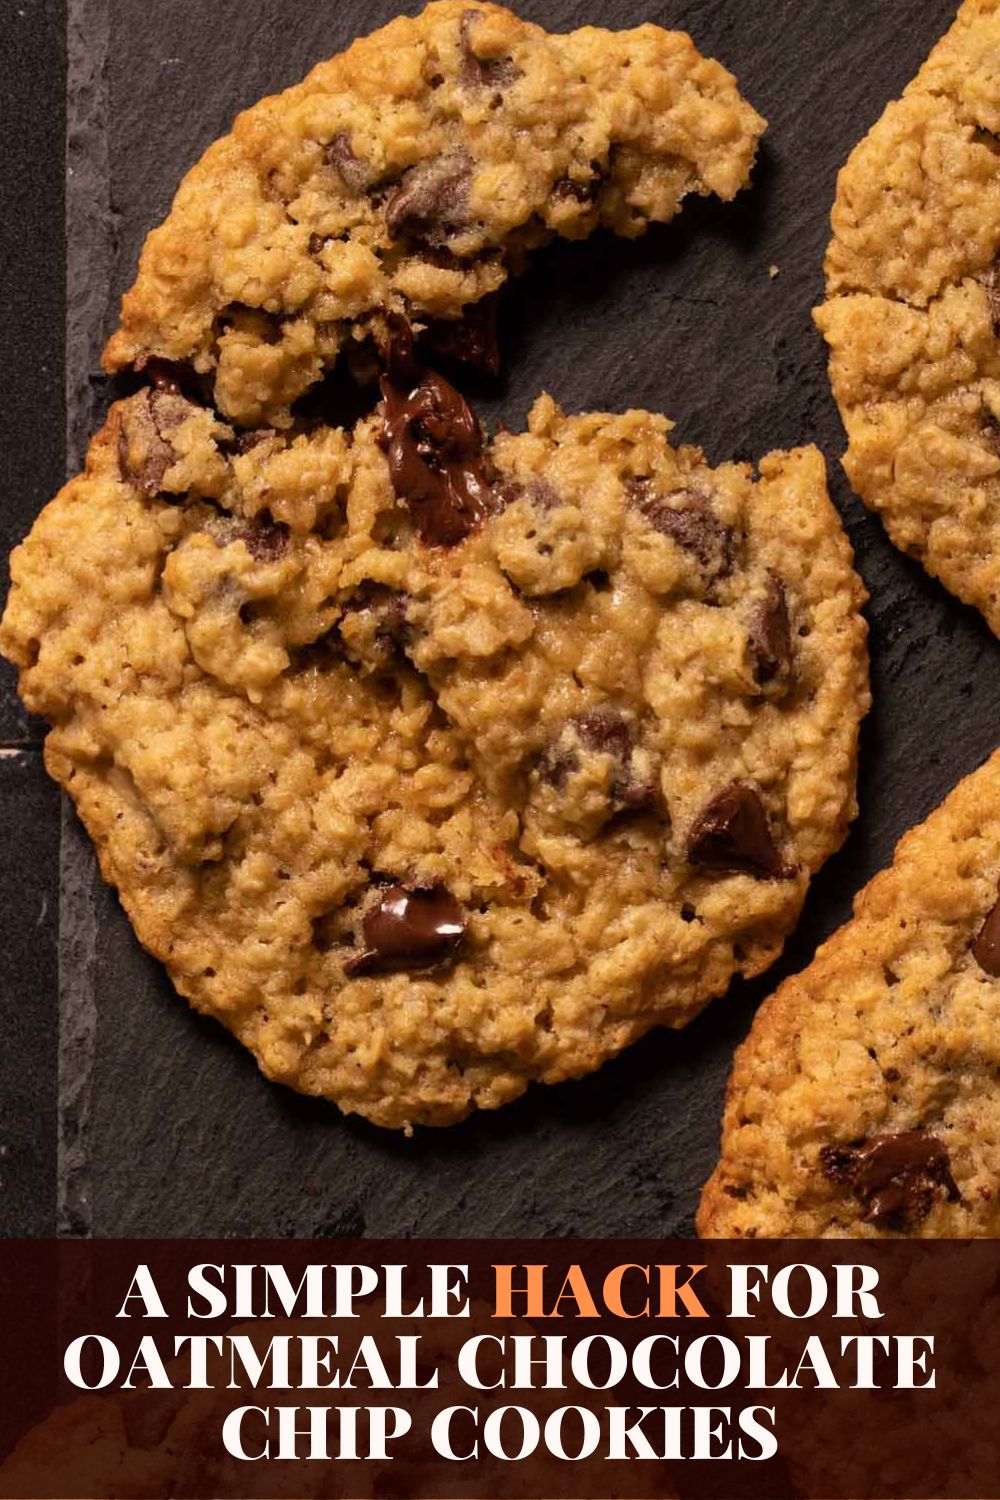 These small batch oatmeal chocolate chip cookies have a simple hack to make them utterly delicious via @bessiebakes